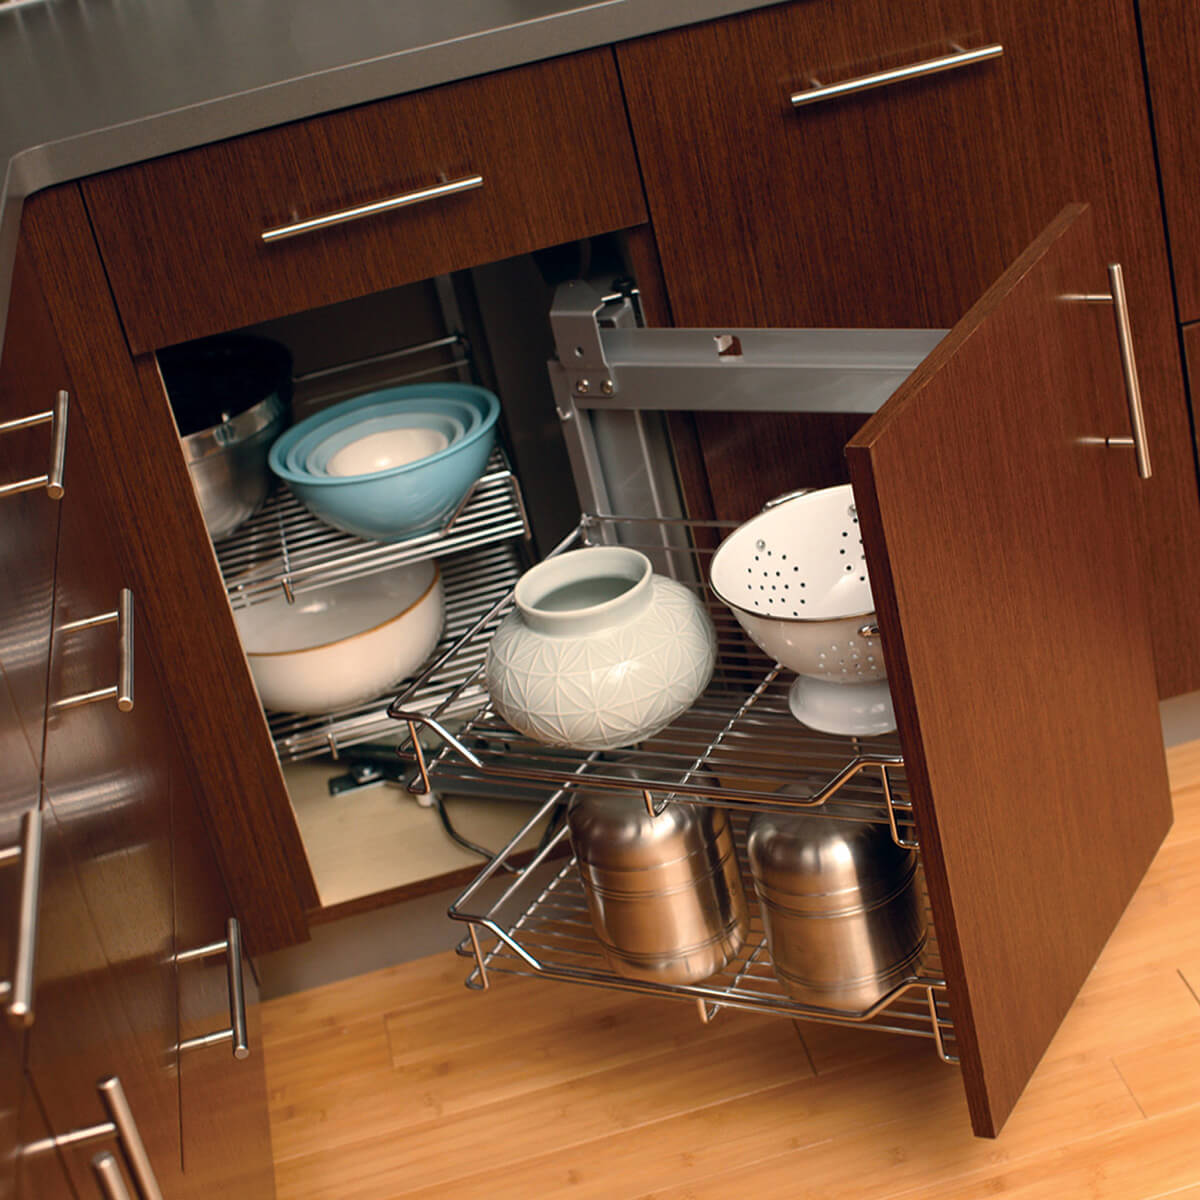 Base Tray Cabinet - Dura Supreme Cabinetry